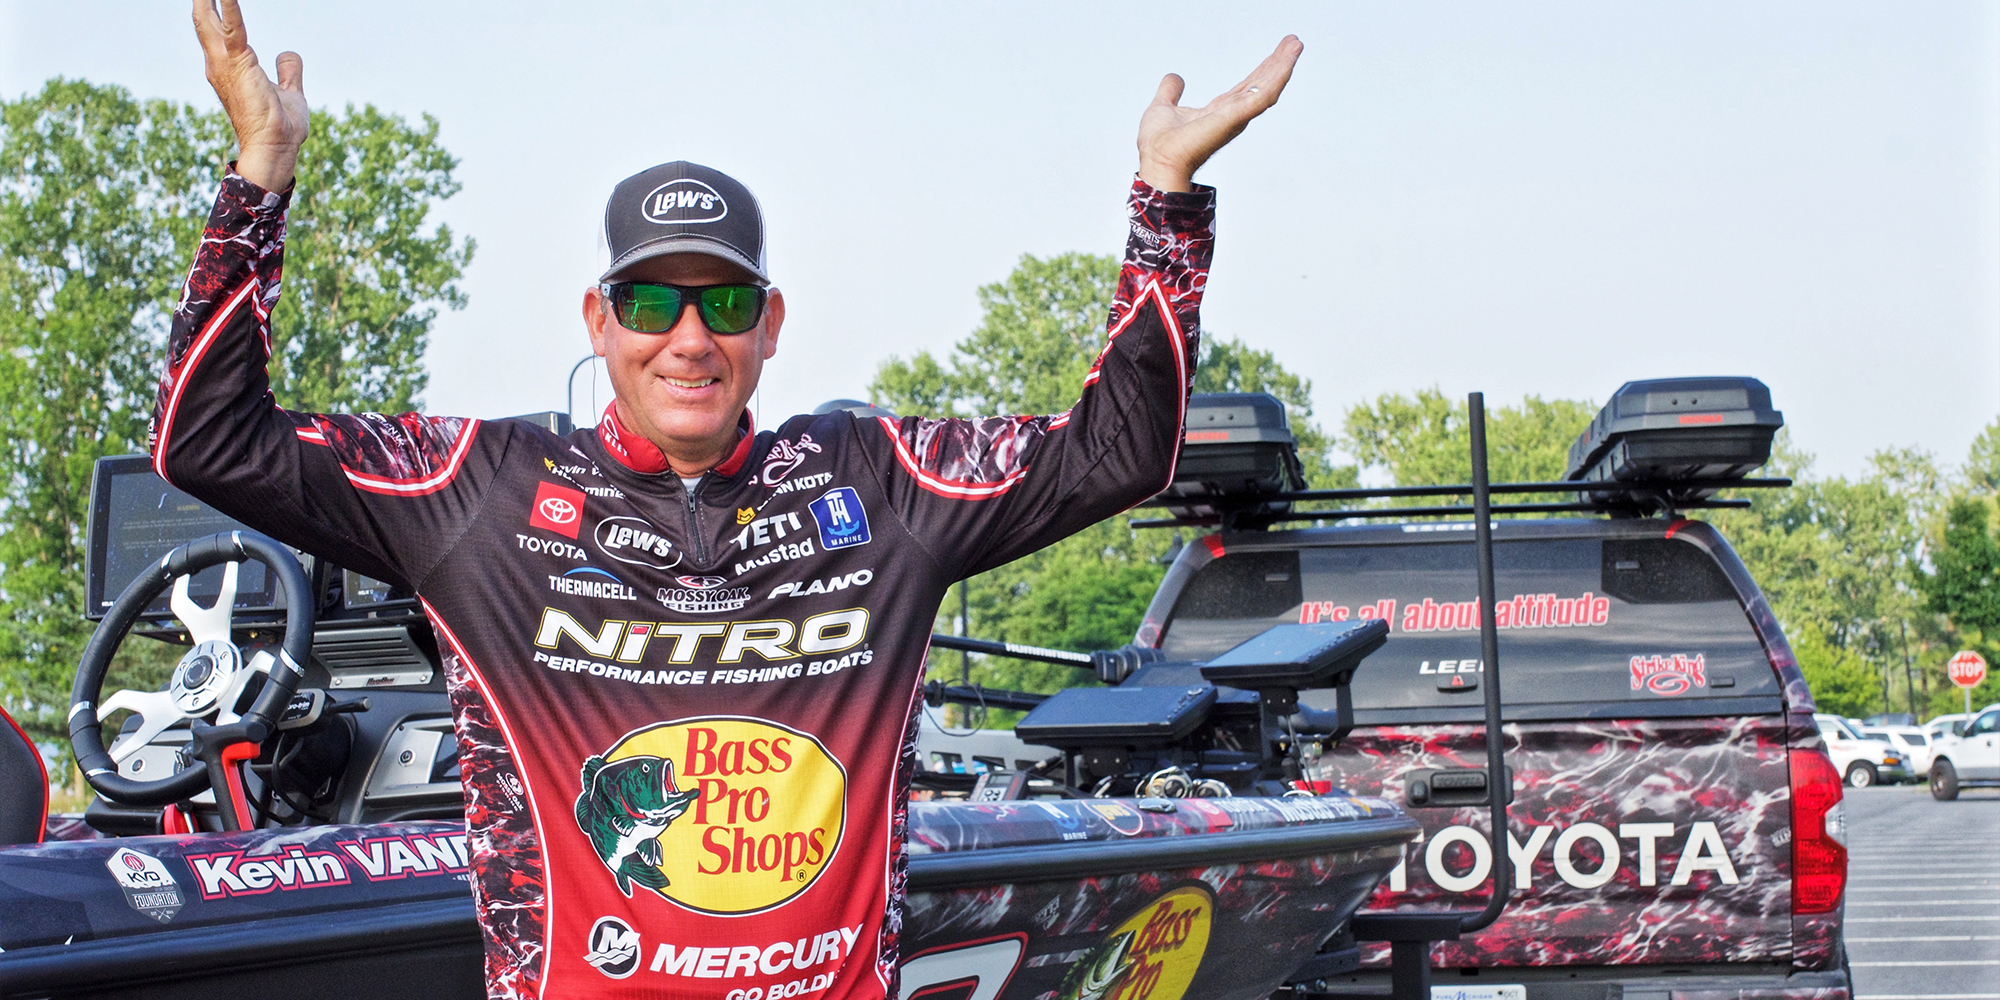 Plano College of Bass with KVD - The Fishing Wire